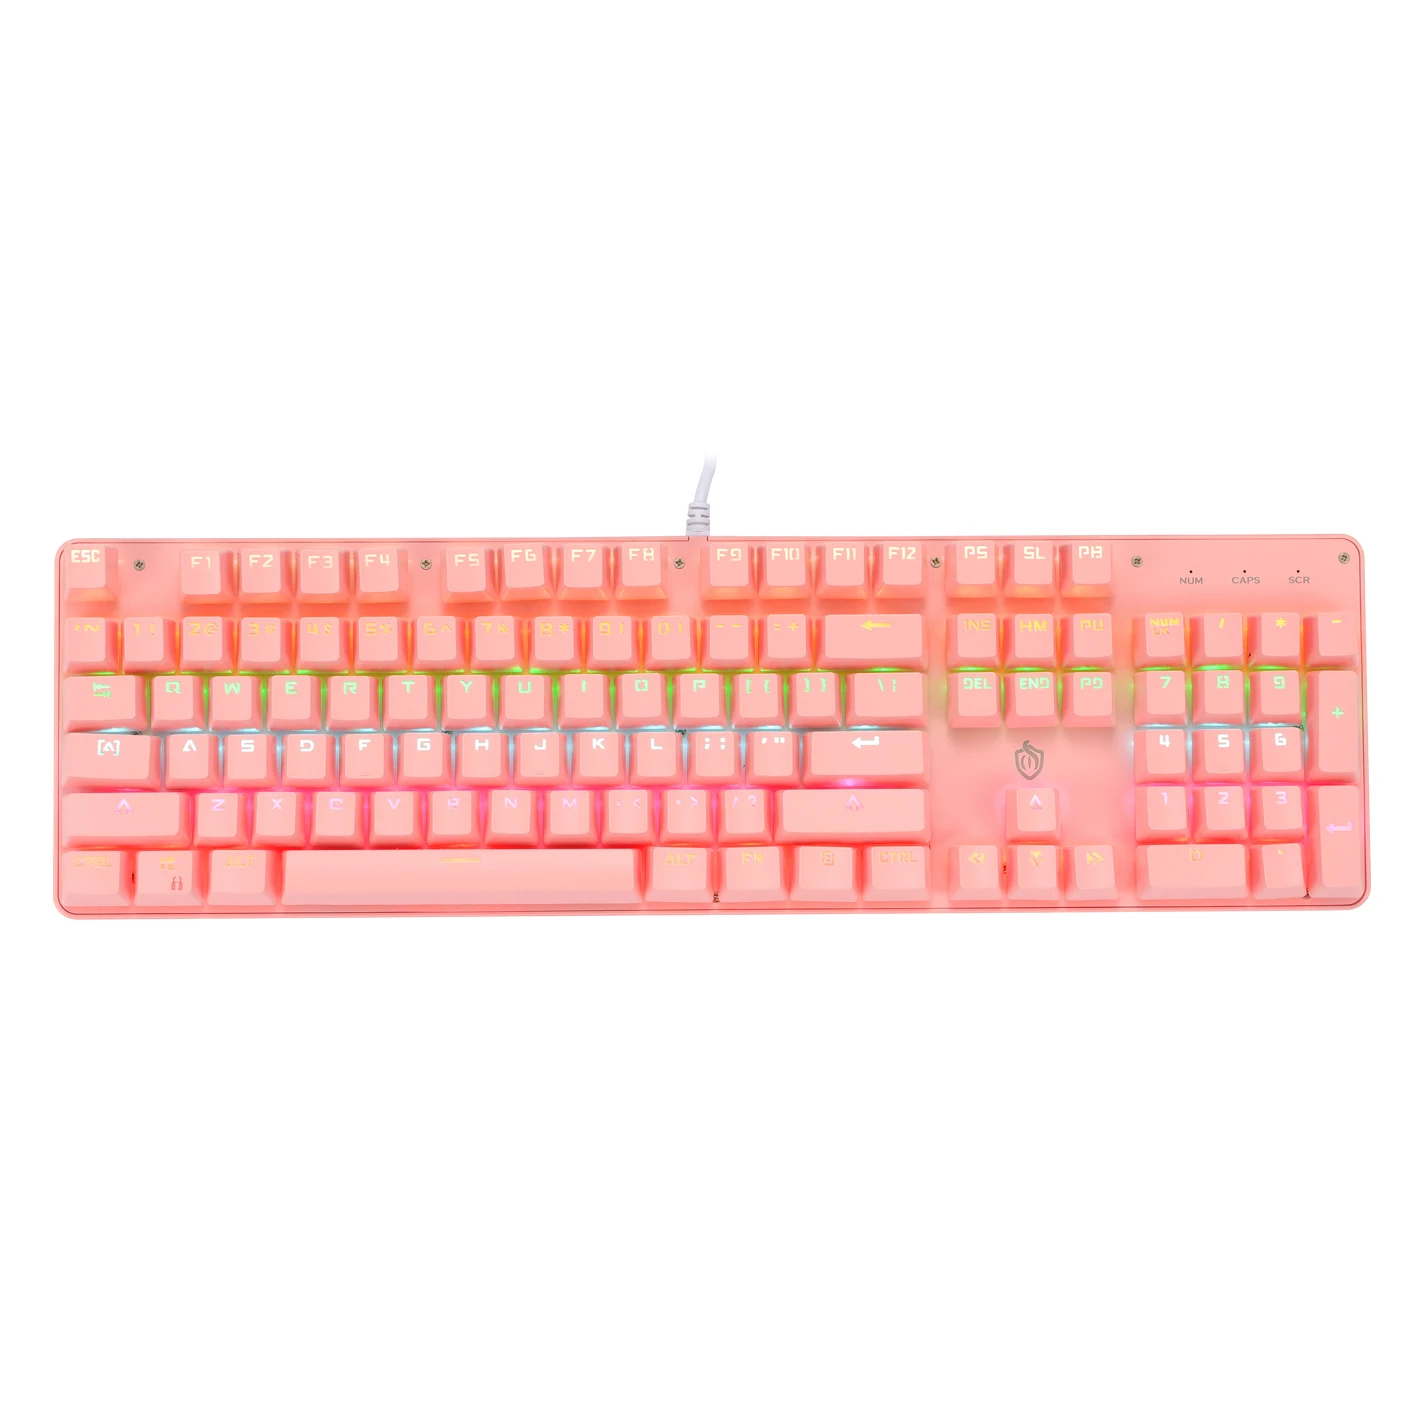 Factory price wholesale OEM/ODM 104 key full size LED backlight wired mechanical keyboard